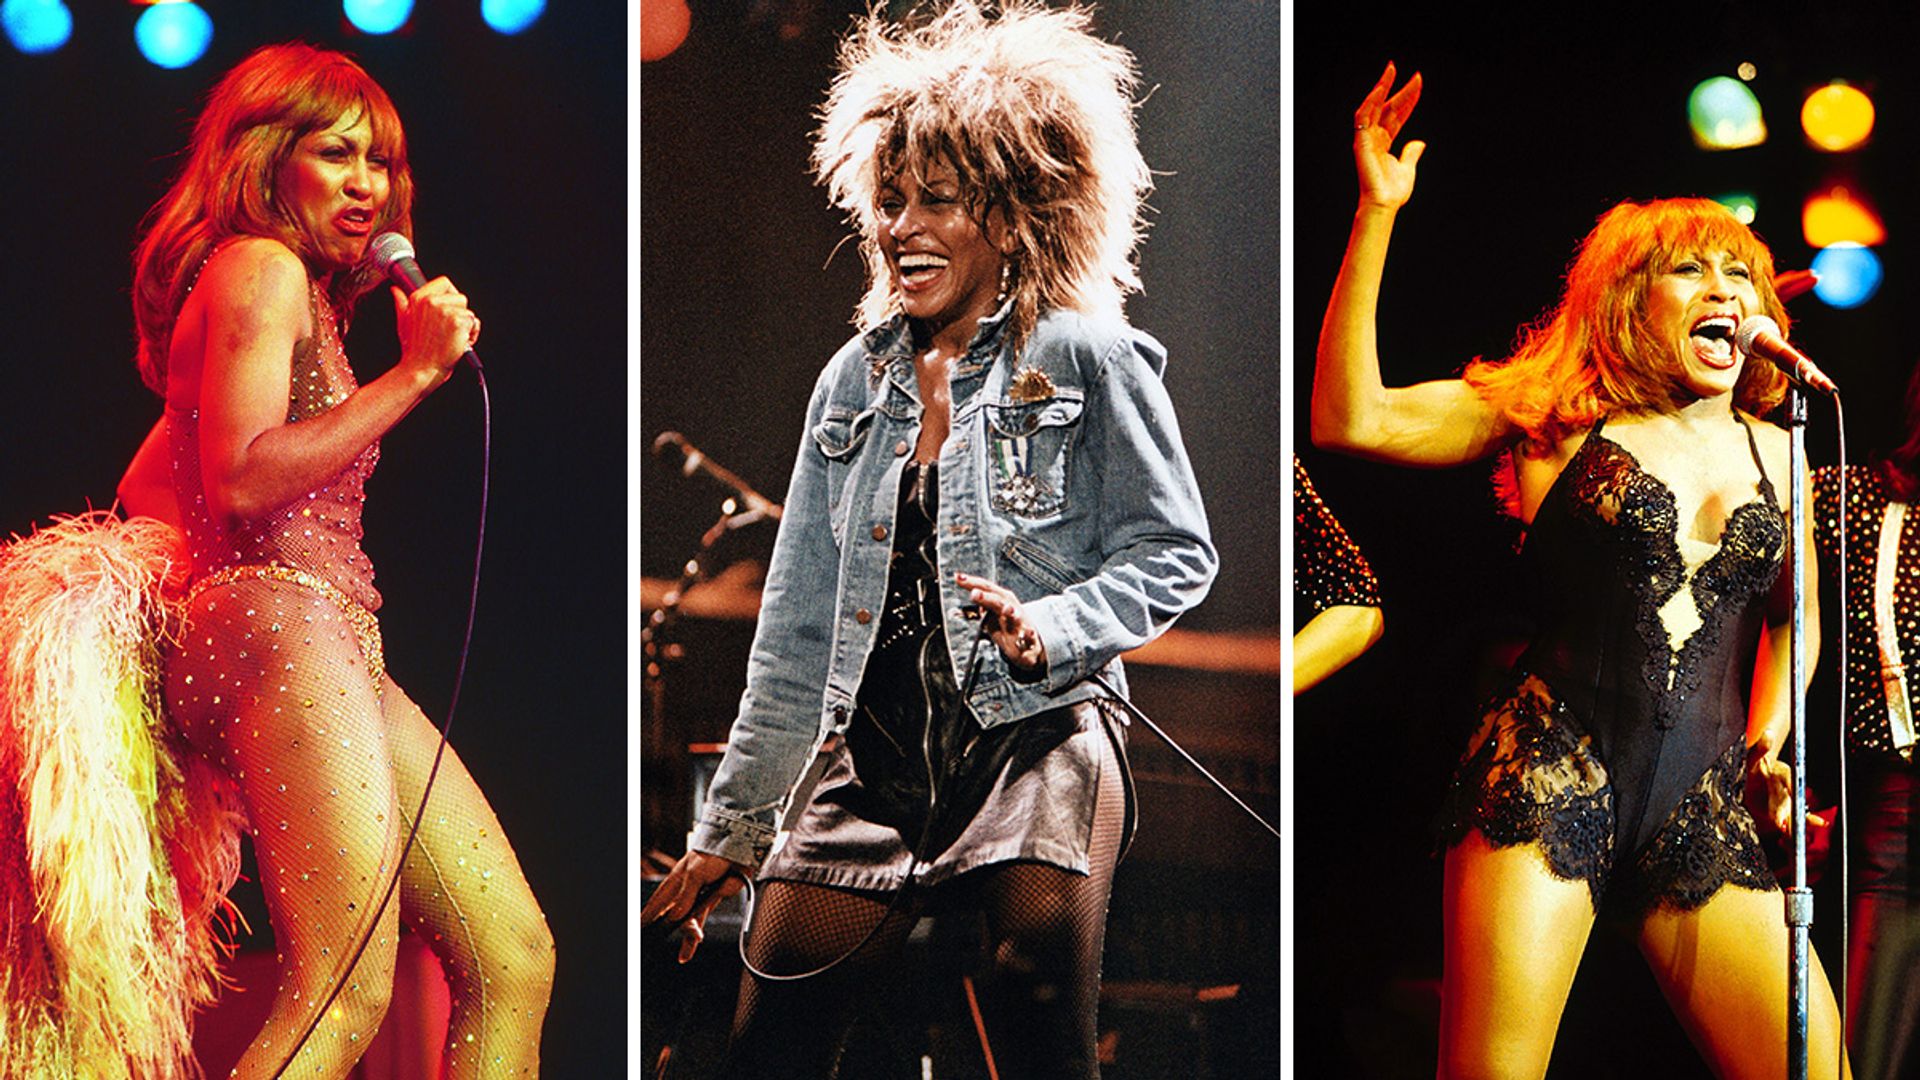 Three images of Tina Turner: wearing a bedazzled bodystocking, a denim jacket and a black lace mini dress